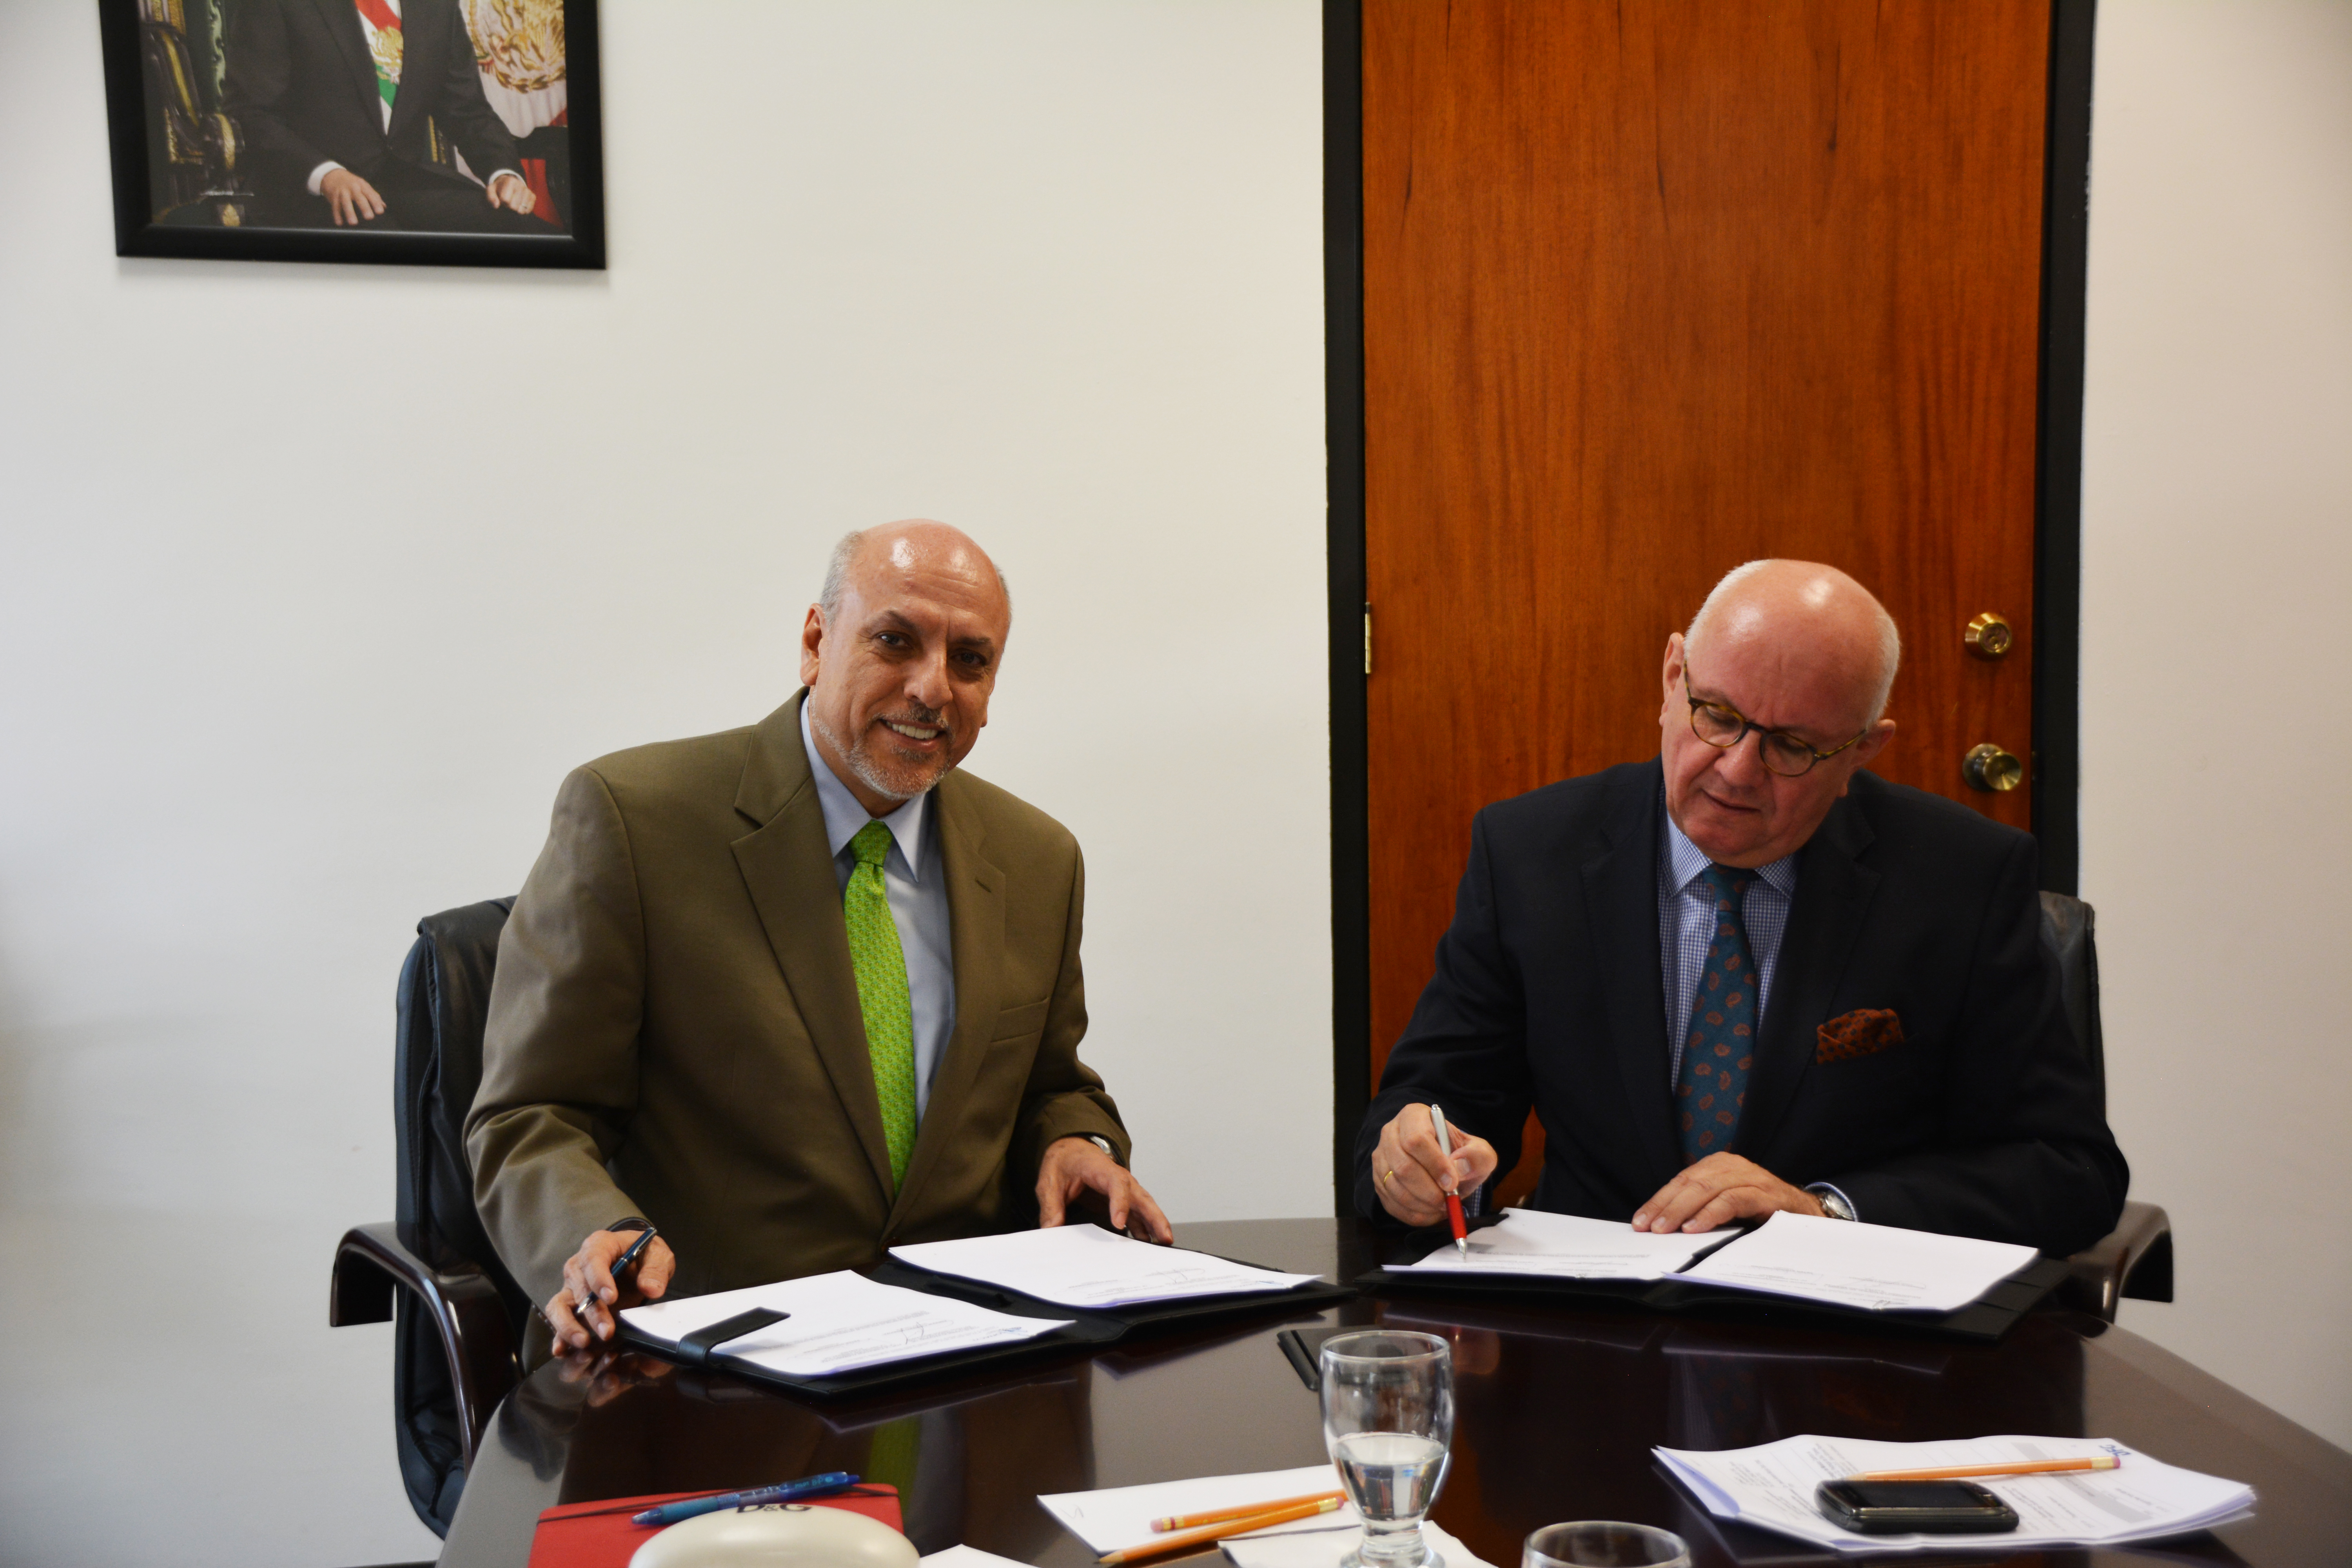 The DFG President Prof. Peter Strohschneider and the General Director of CONACYT, Prof. Enrique Cabrero Mendoza conclude a new agreement between their organisations in Mexico